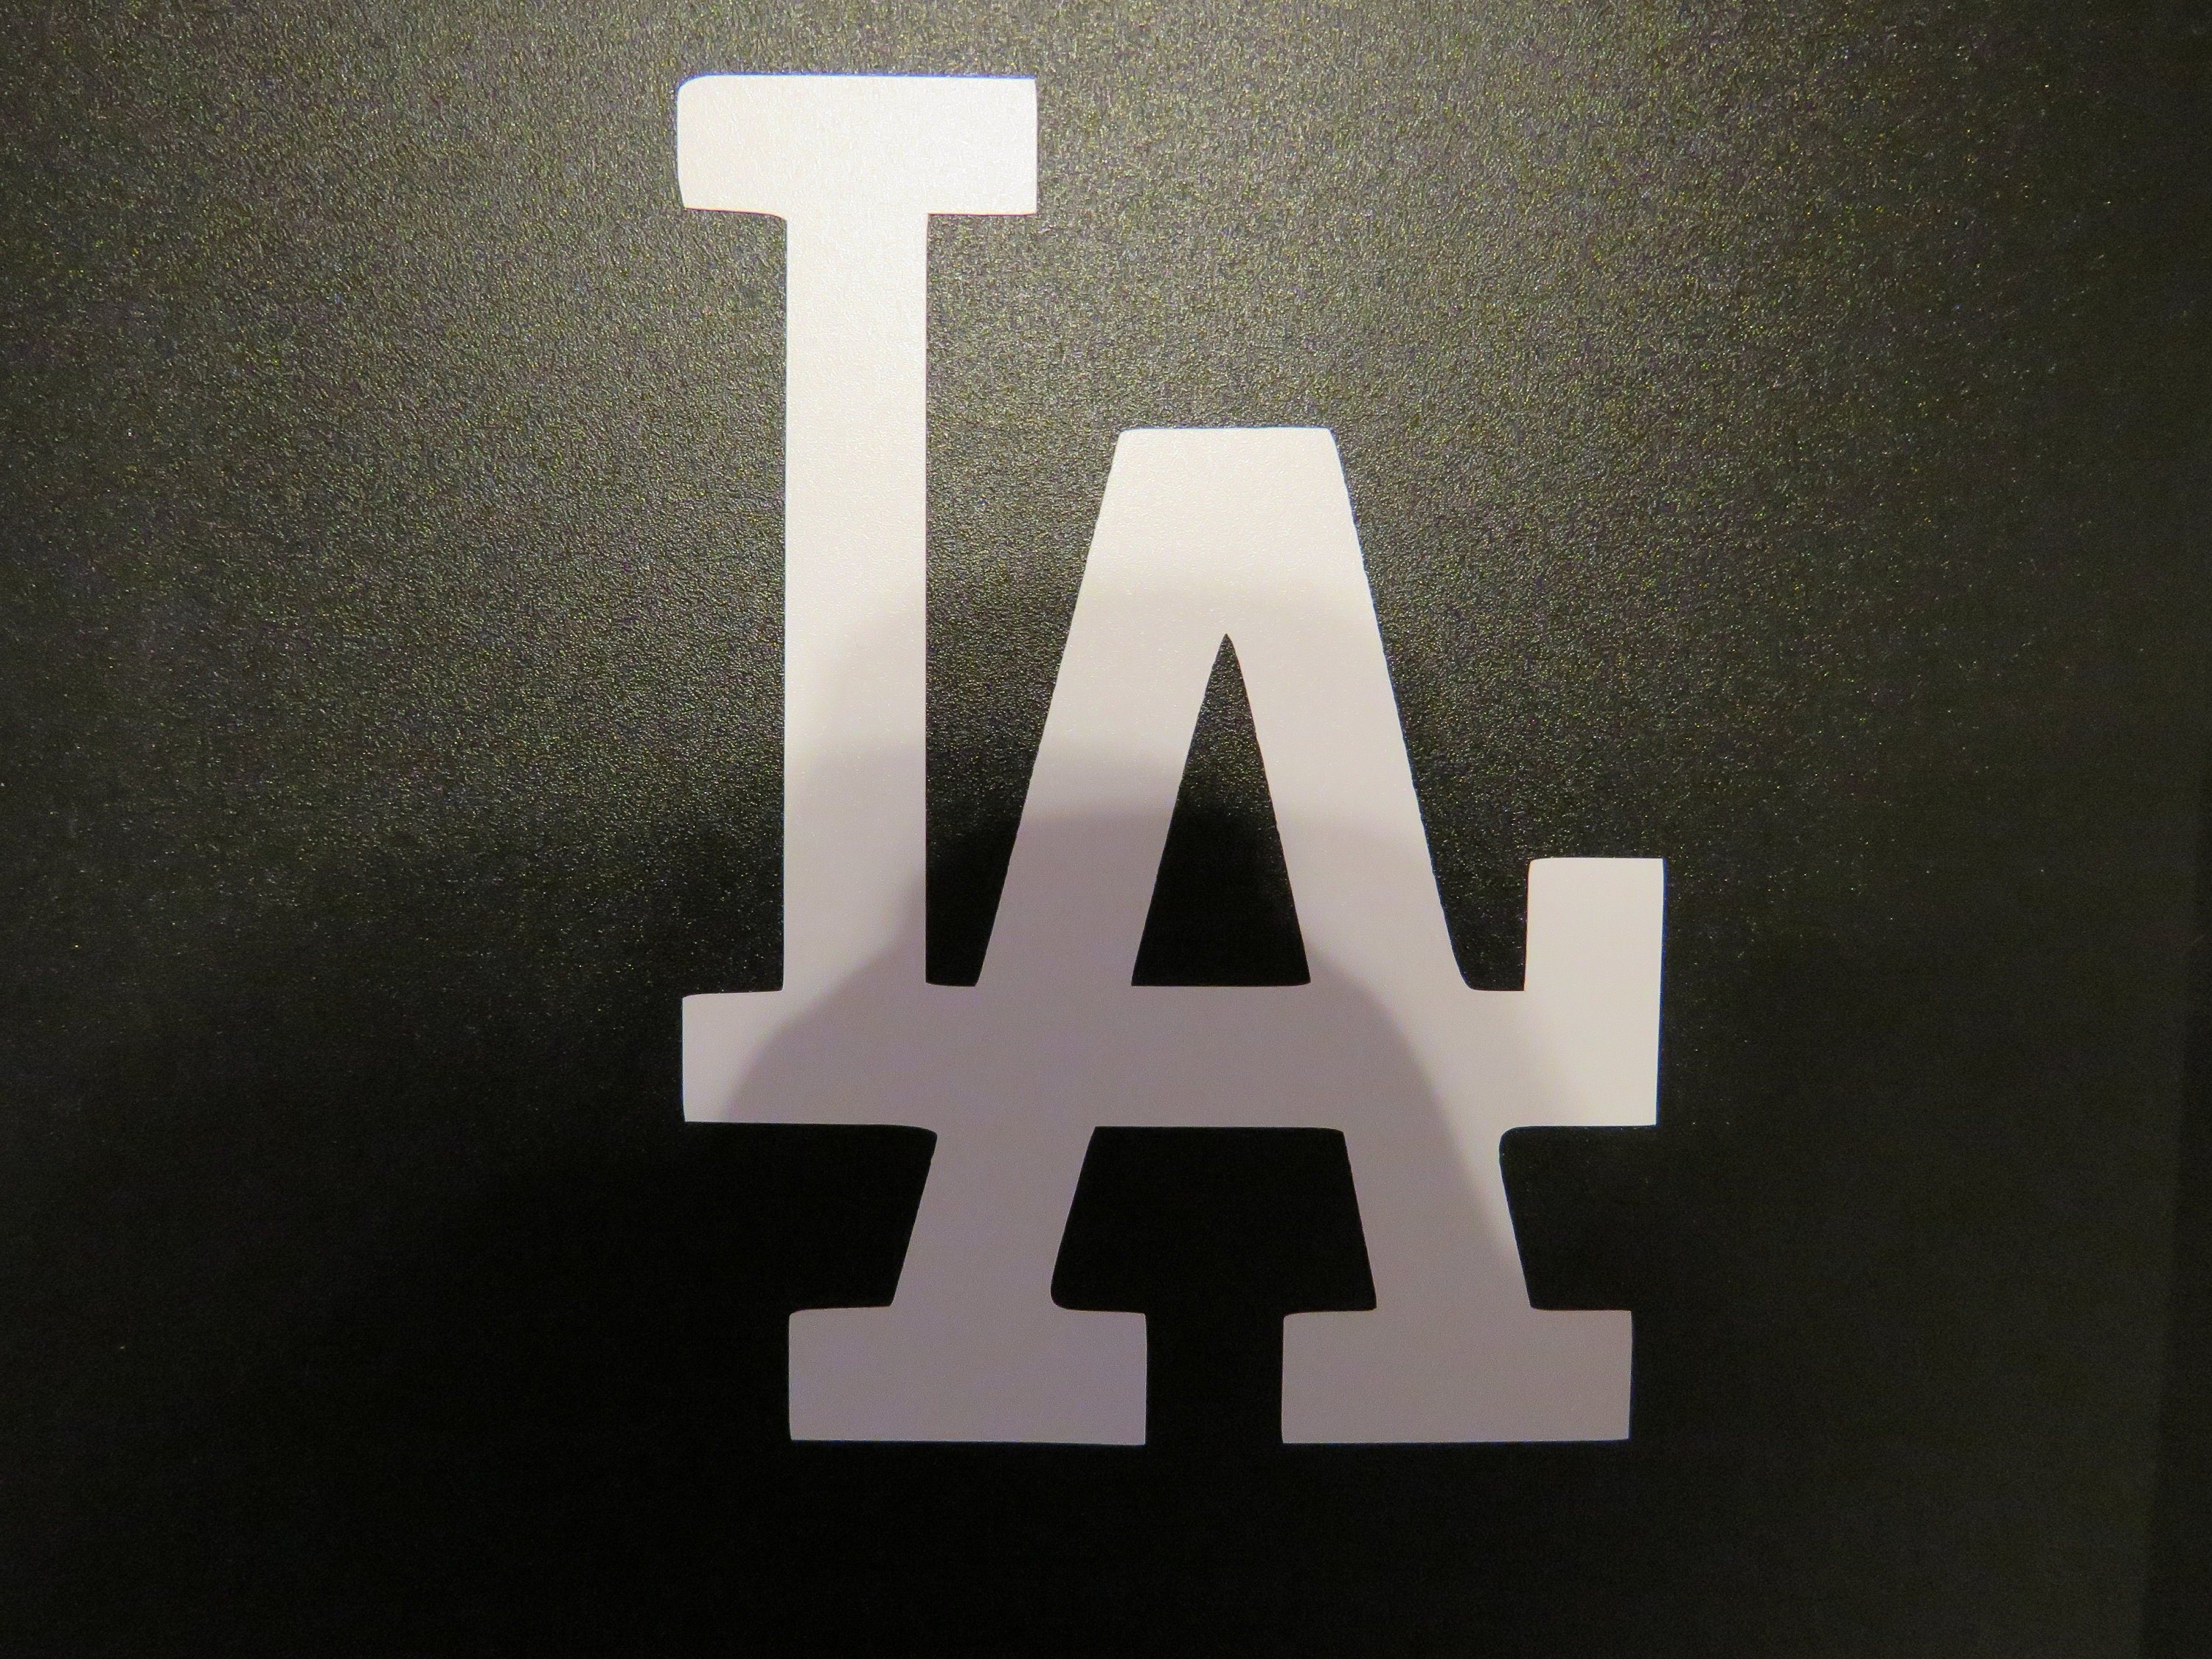 Los Angeles Letters Vinyl Decal Decoration For Tint Windows